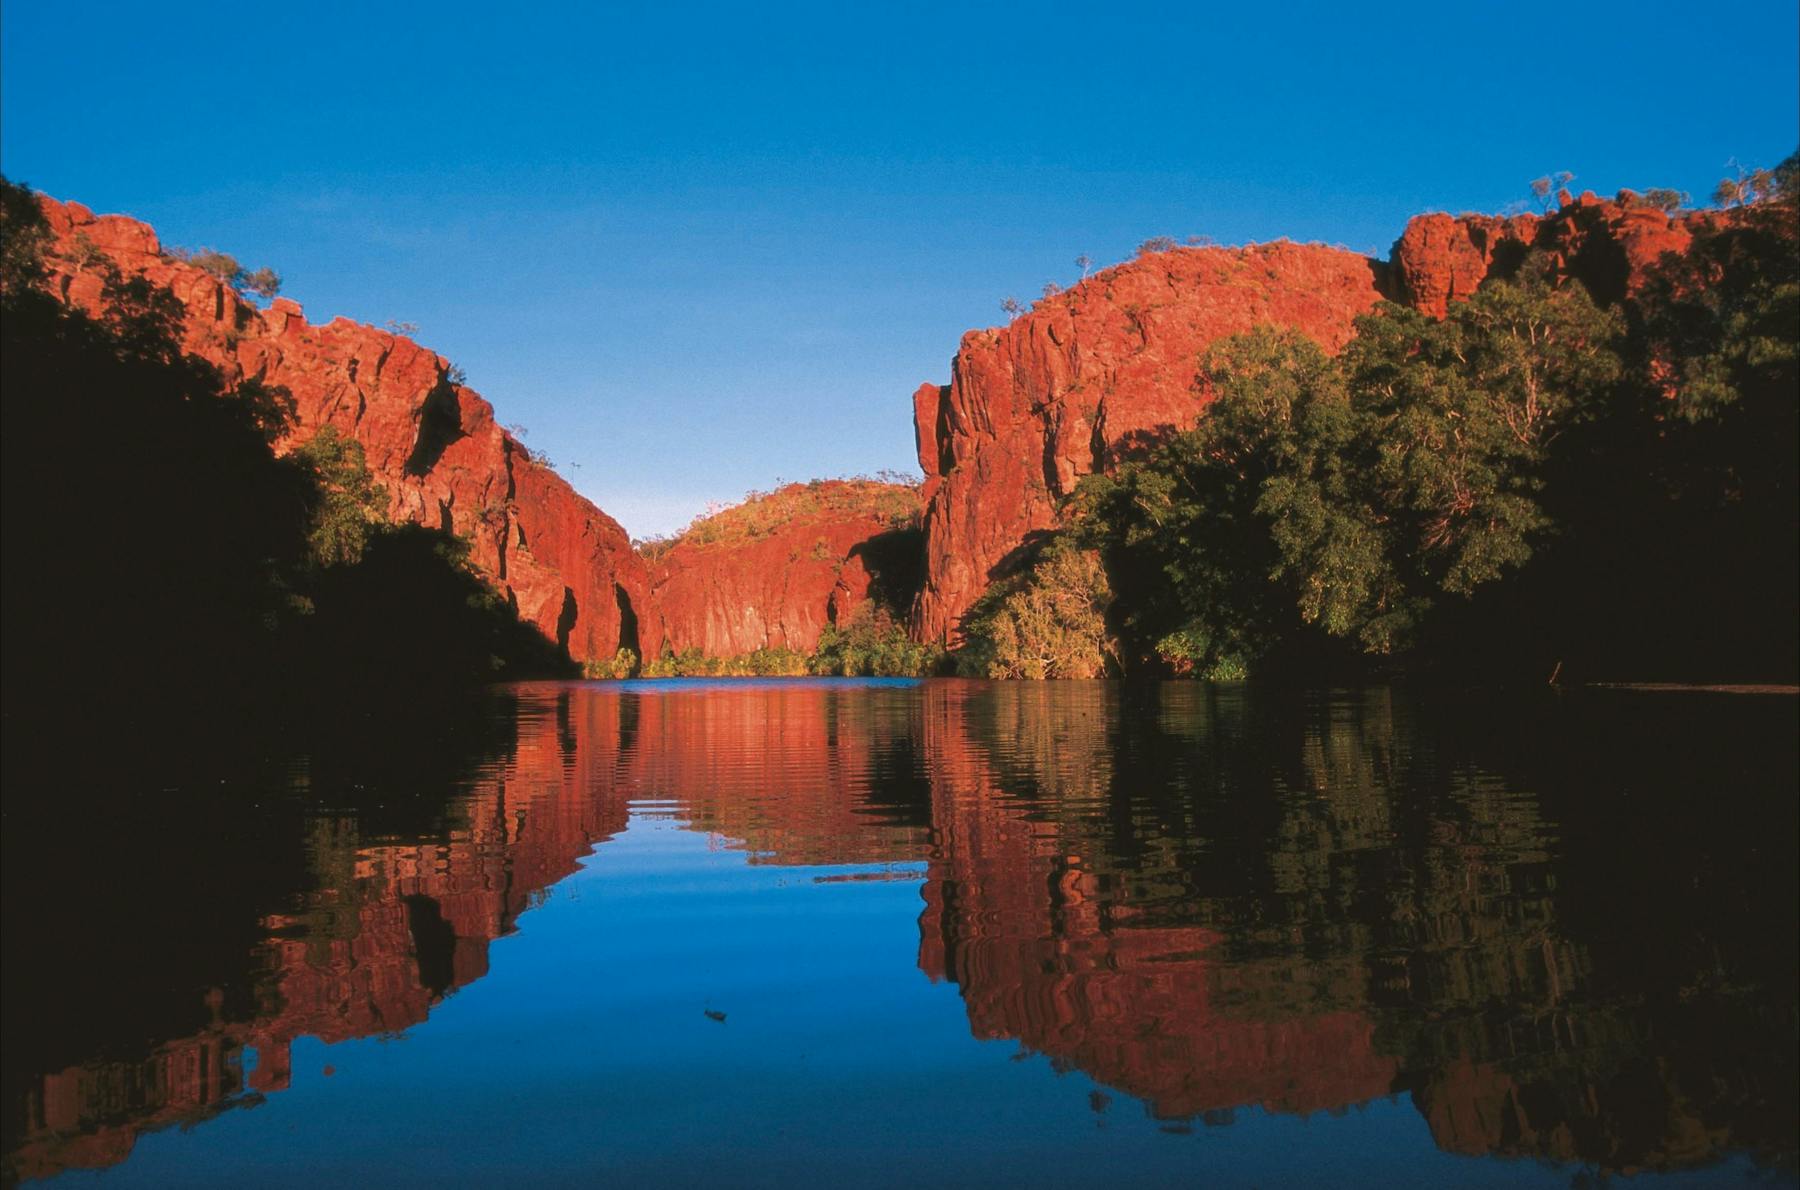 Red sandstone cliffs reflected on blue waters of Lawn Hill Creek.